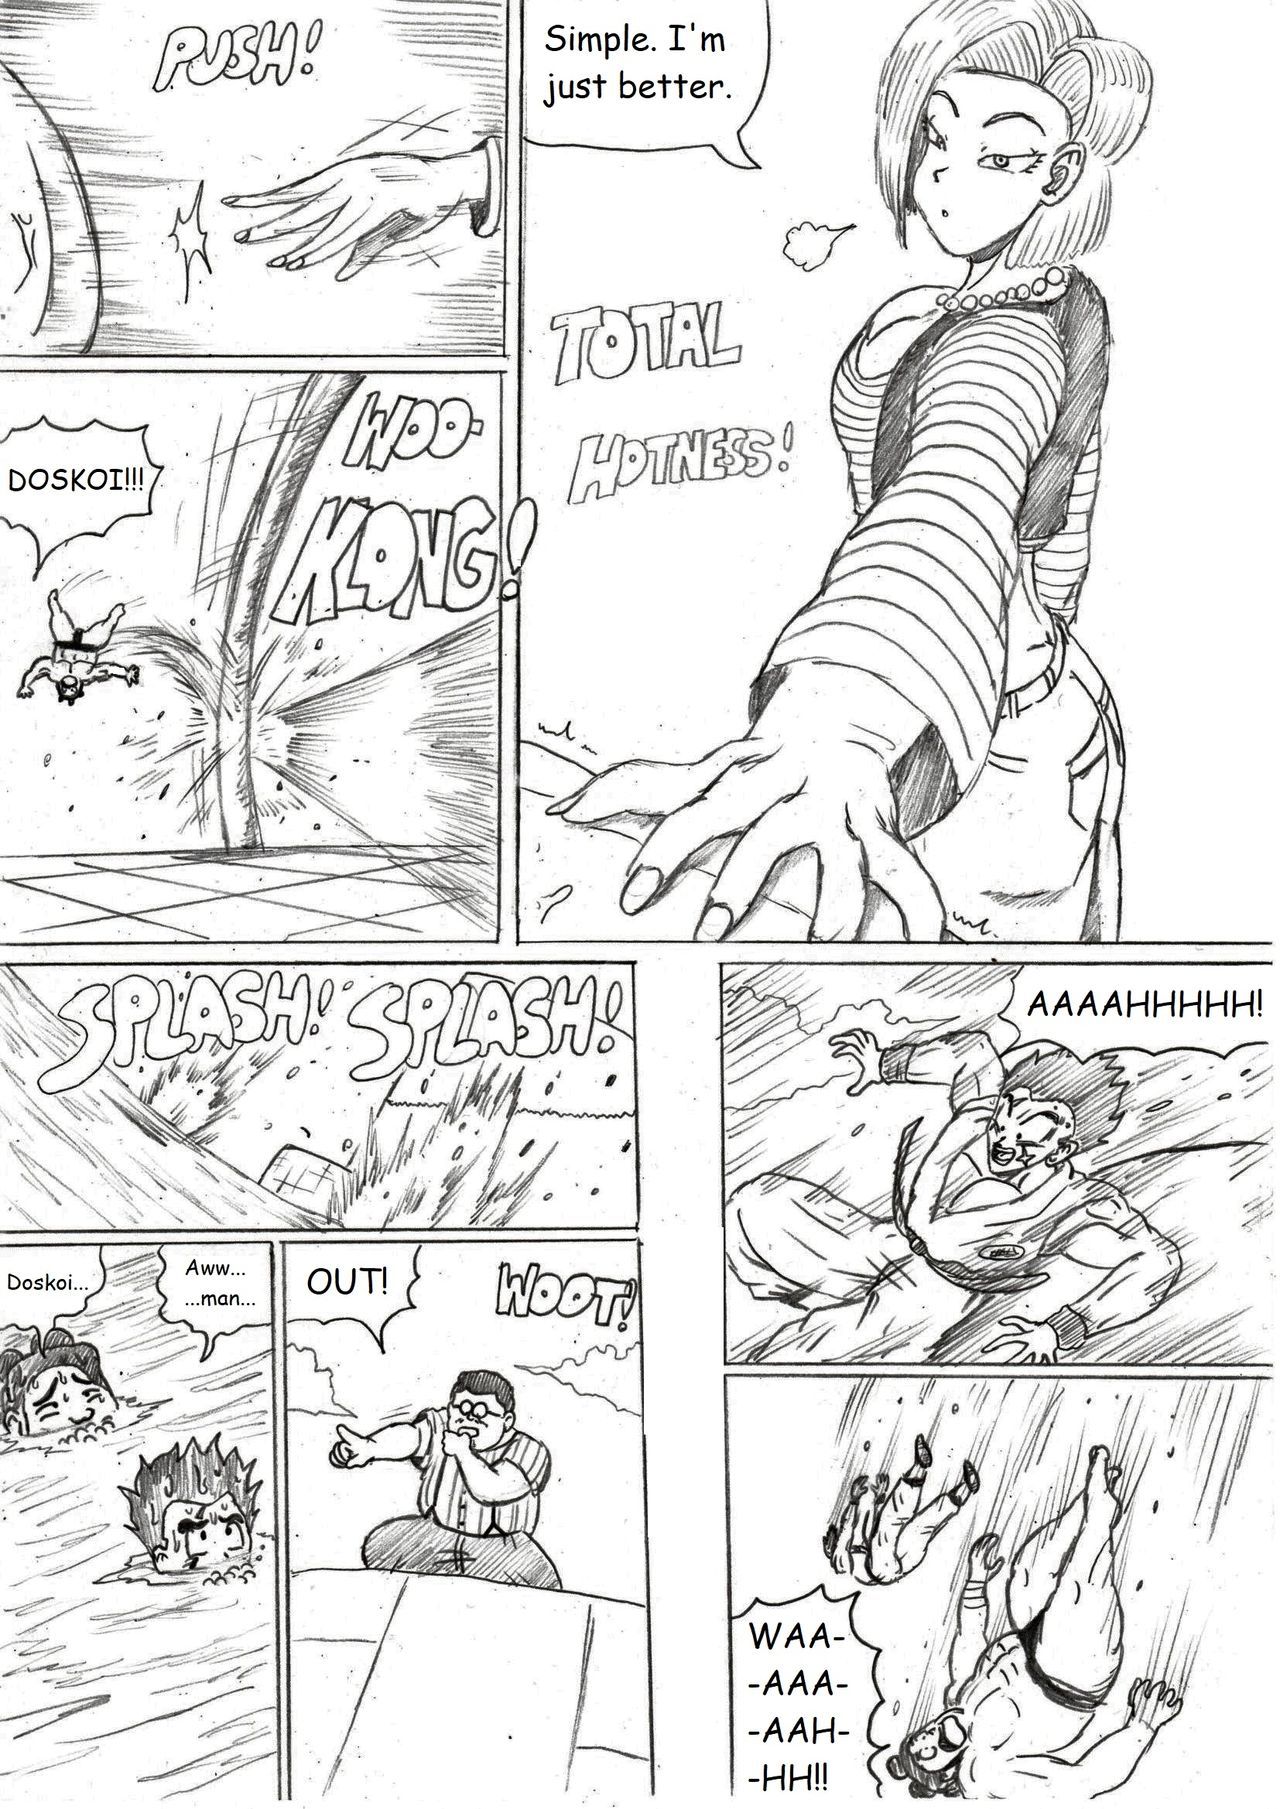 [TheWriteFiction] Dragonball Z Golden Age - Chapter 3 - The Strange Tournament (Ongoing) 24